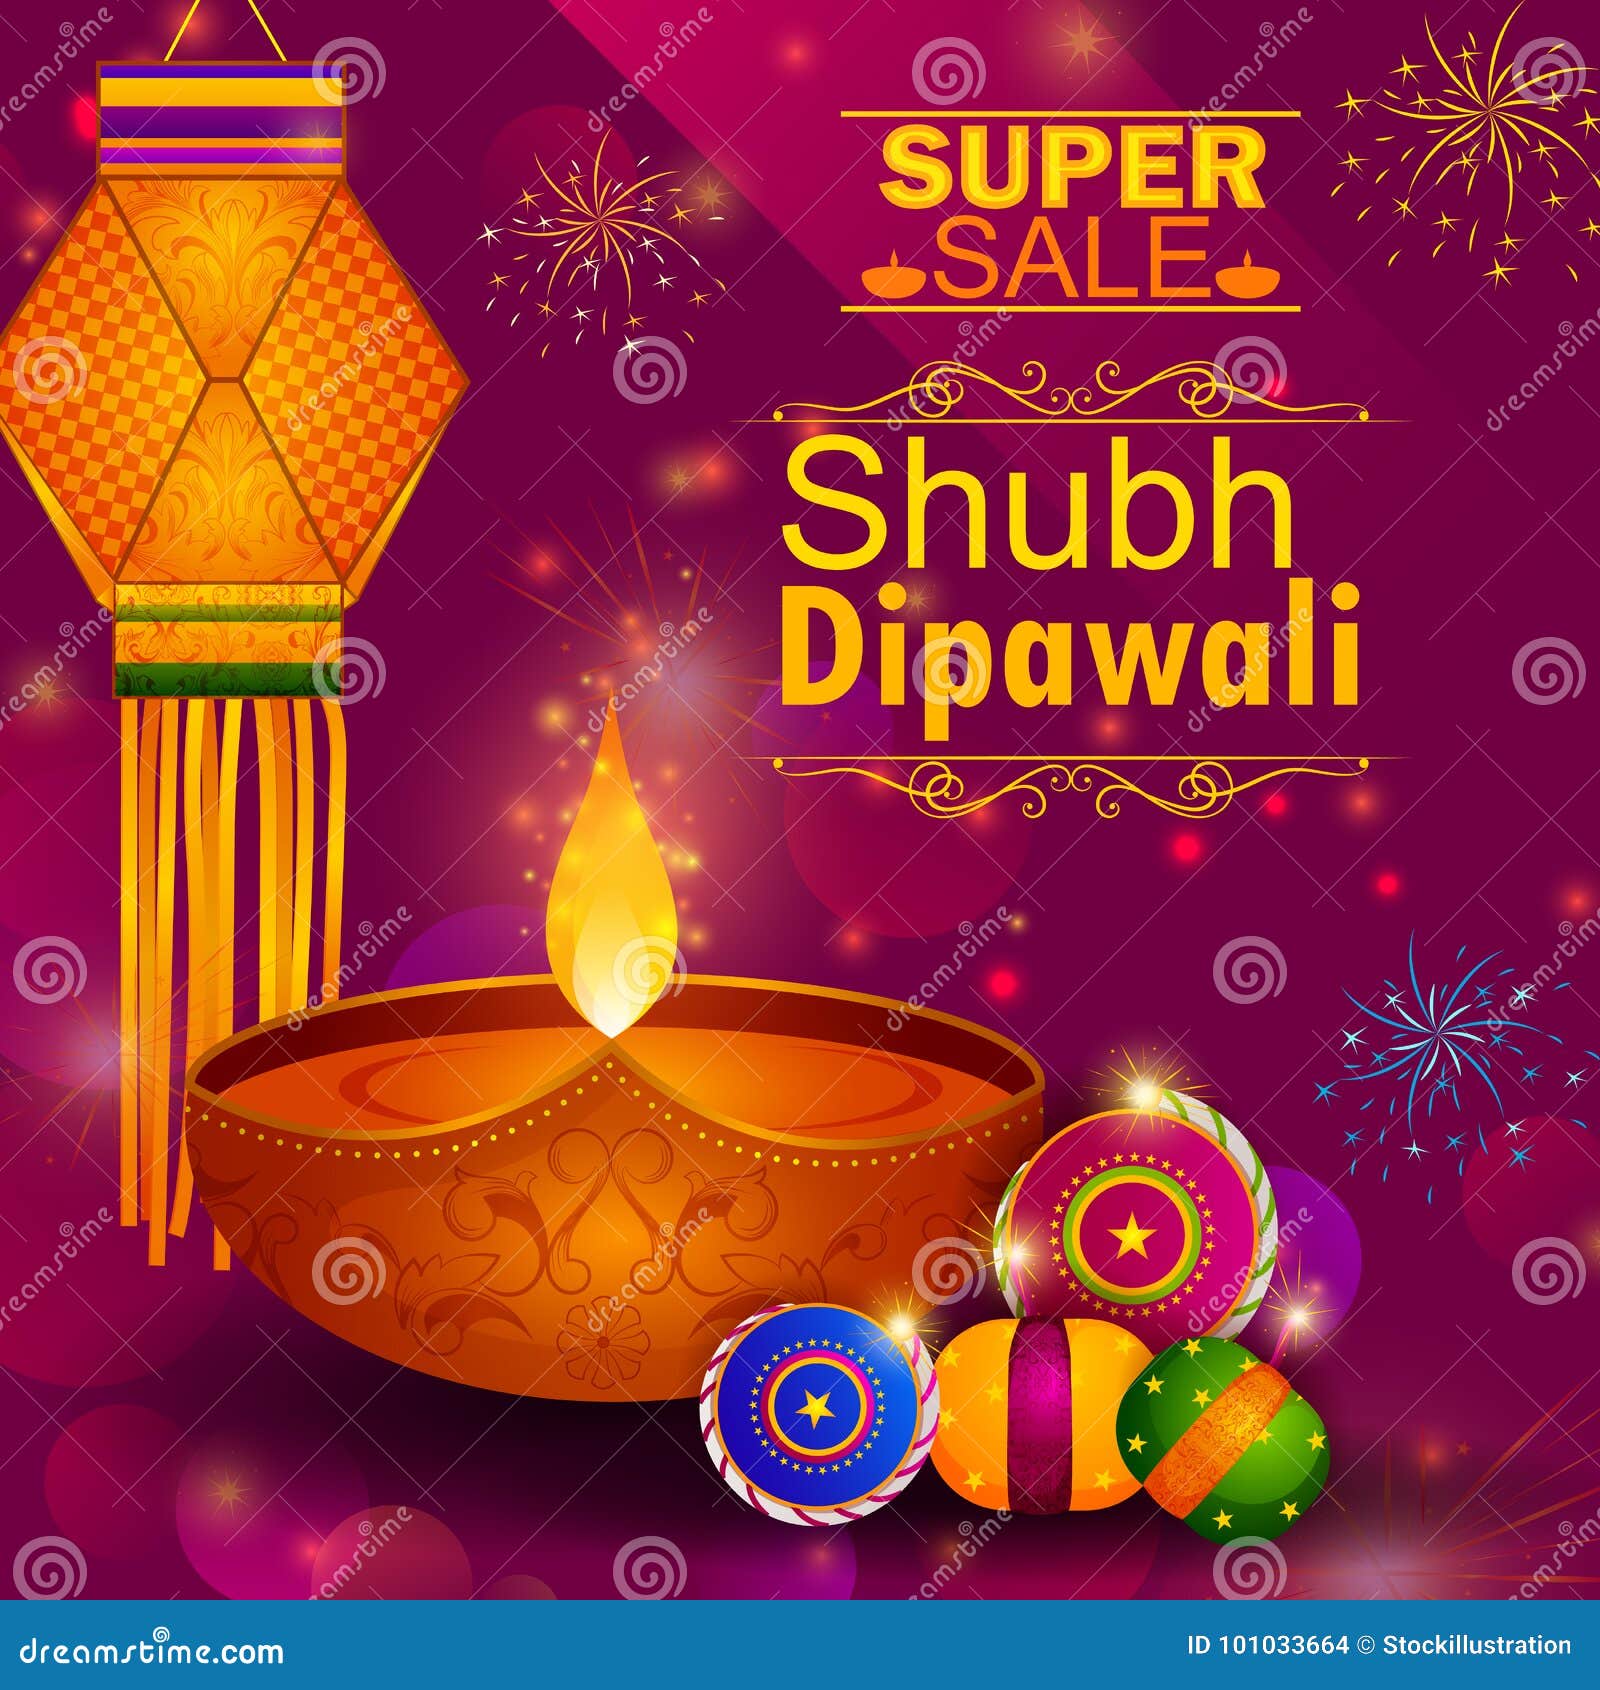 Happy Diwali Light Festival of India Greeting Advertisement Sale Banner  Background Stock Vector - Illustration of discount, ceremony: 101033664